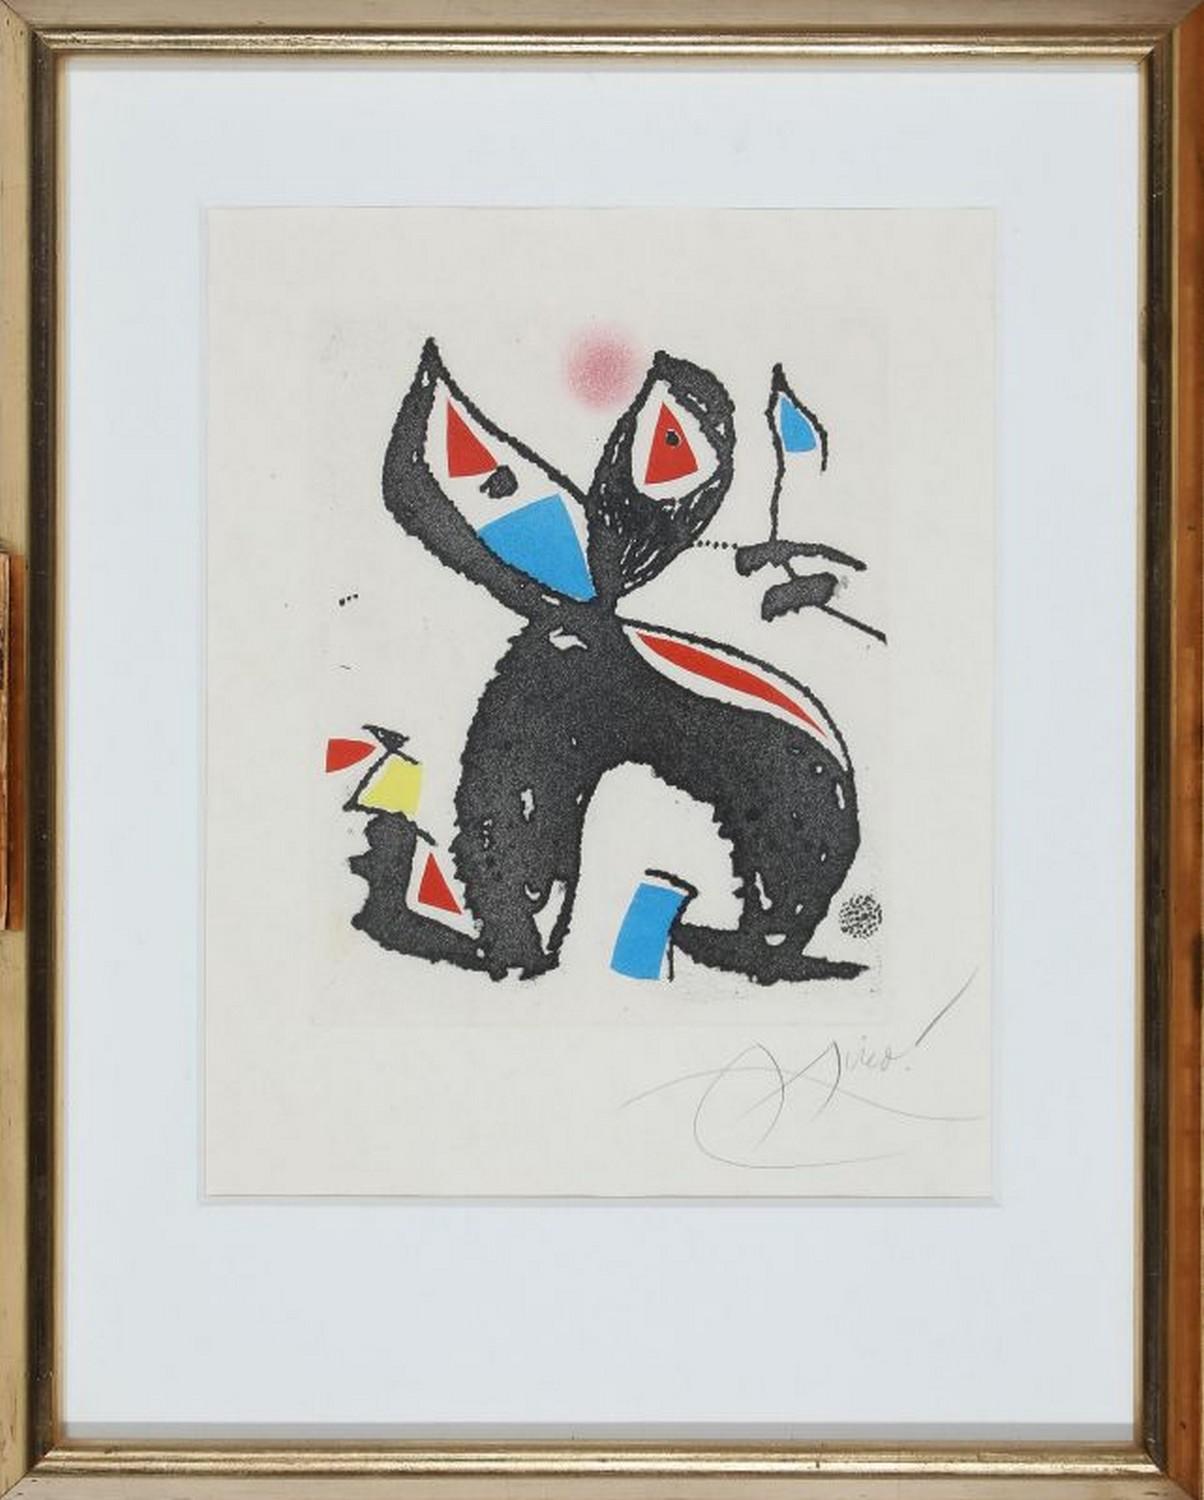 The hammer without a master  - Print by Joan Miró